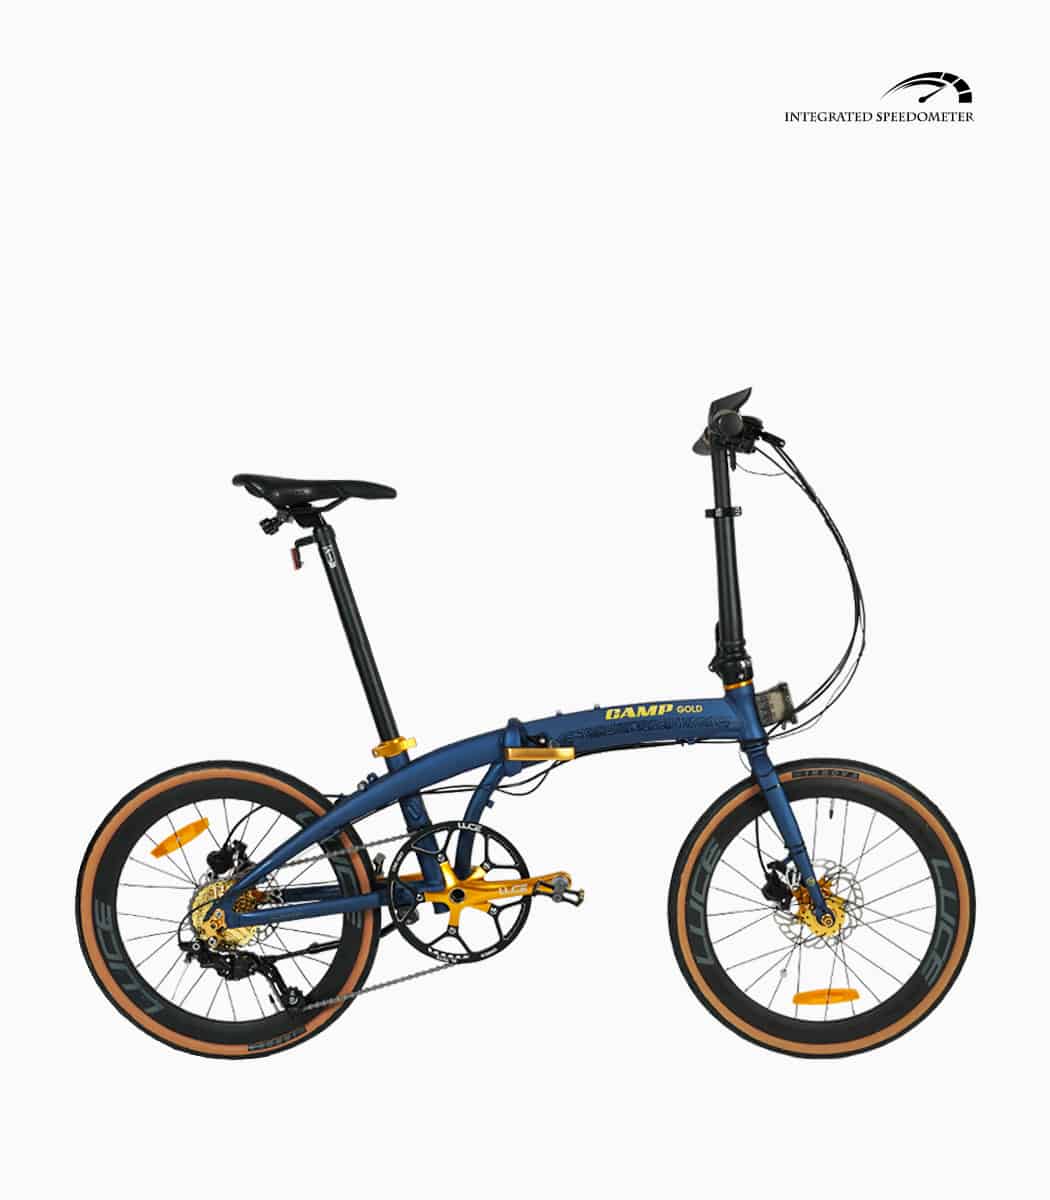 CAMP GOLD Sport (MATT BLUE) foldable bicycle with speedometer right V1